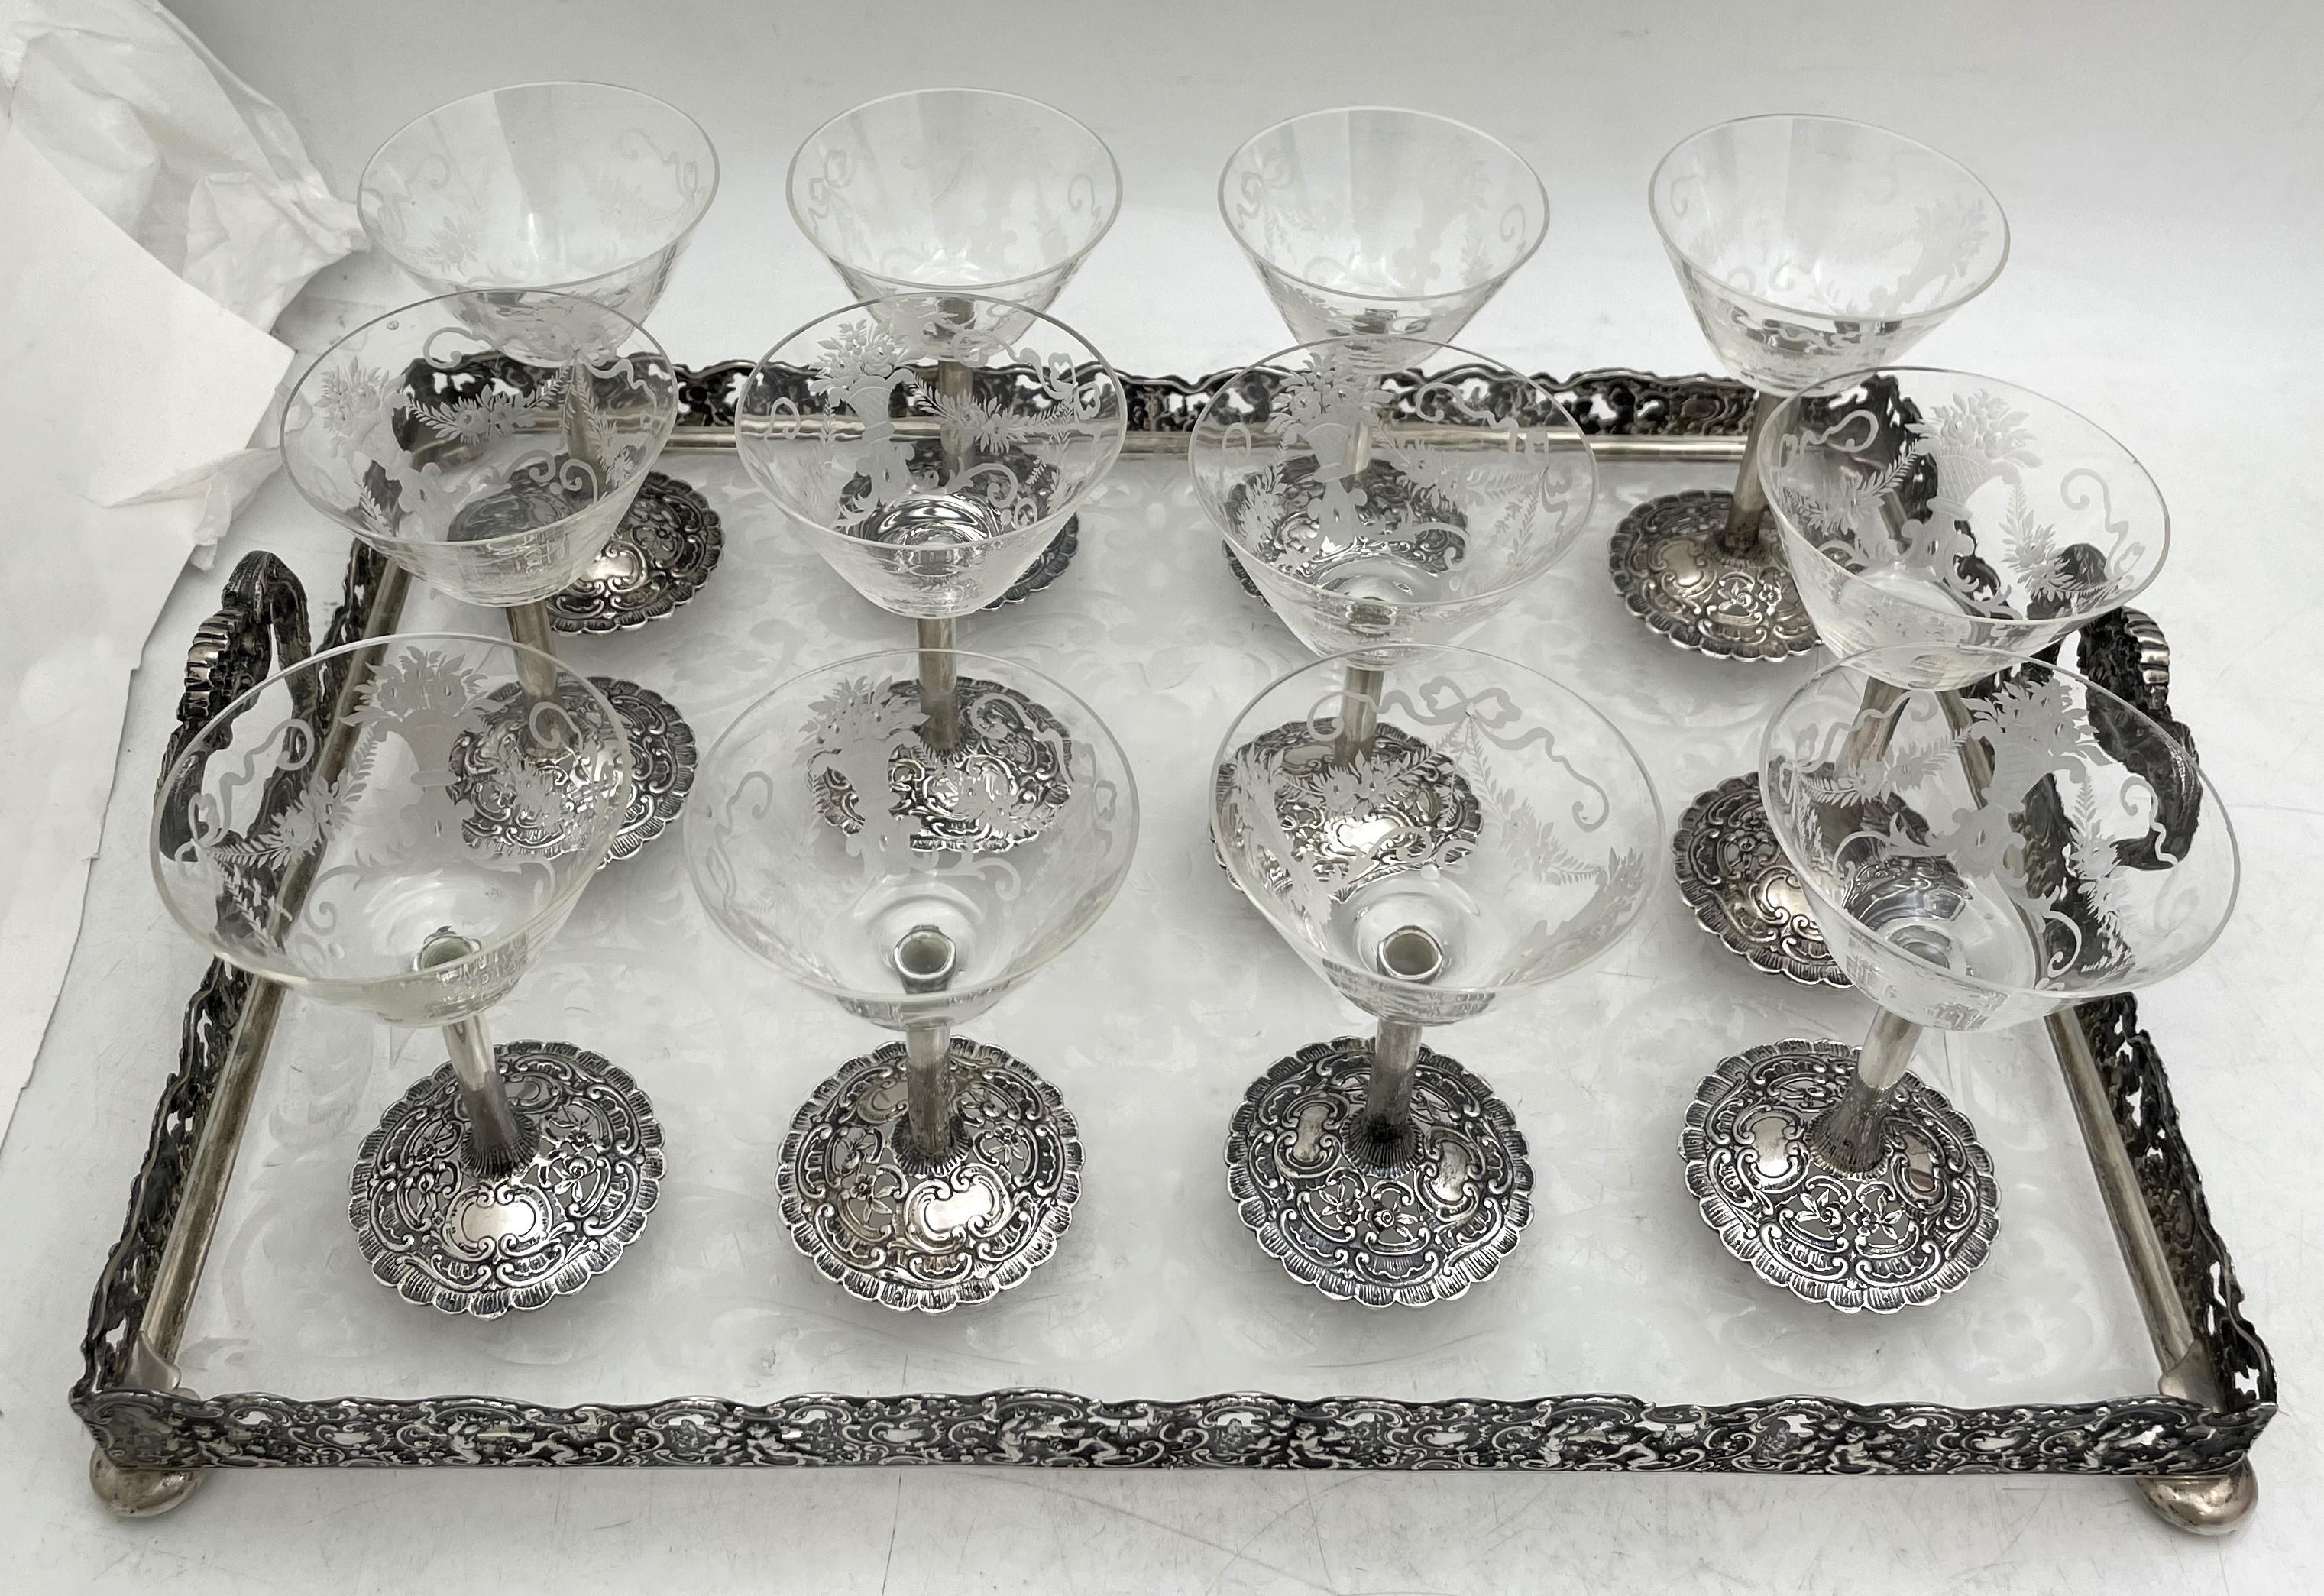 German, continental silver and beautifully etched glass set from the late 19th century, consisting of a two-handled gallery tray, standing on 4 balled feet, measuring 14 3/4'' in length by 11'' in width by 3 1/8'' in height, and 12 matching sherbert